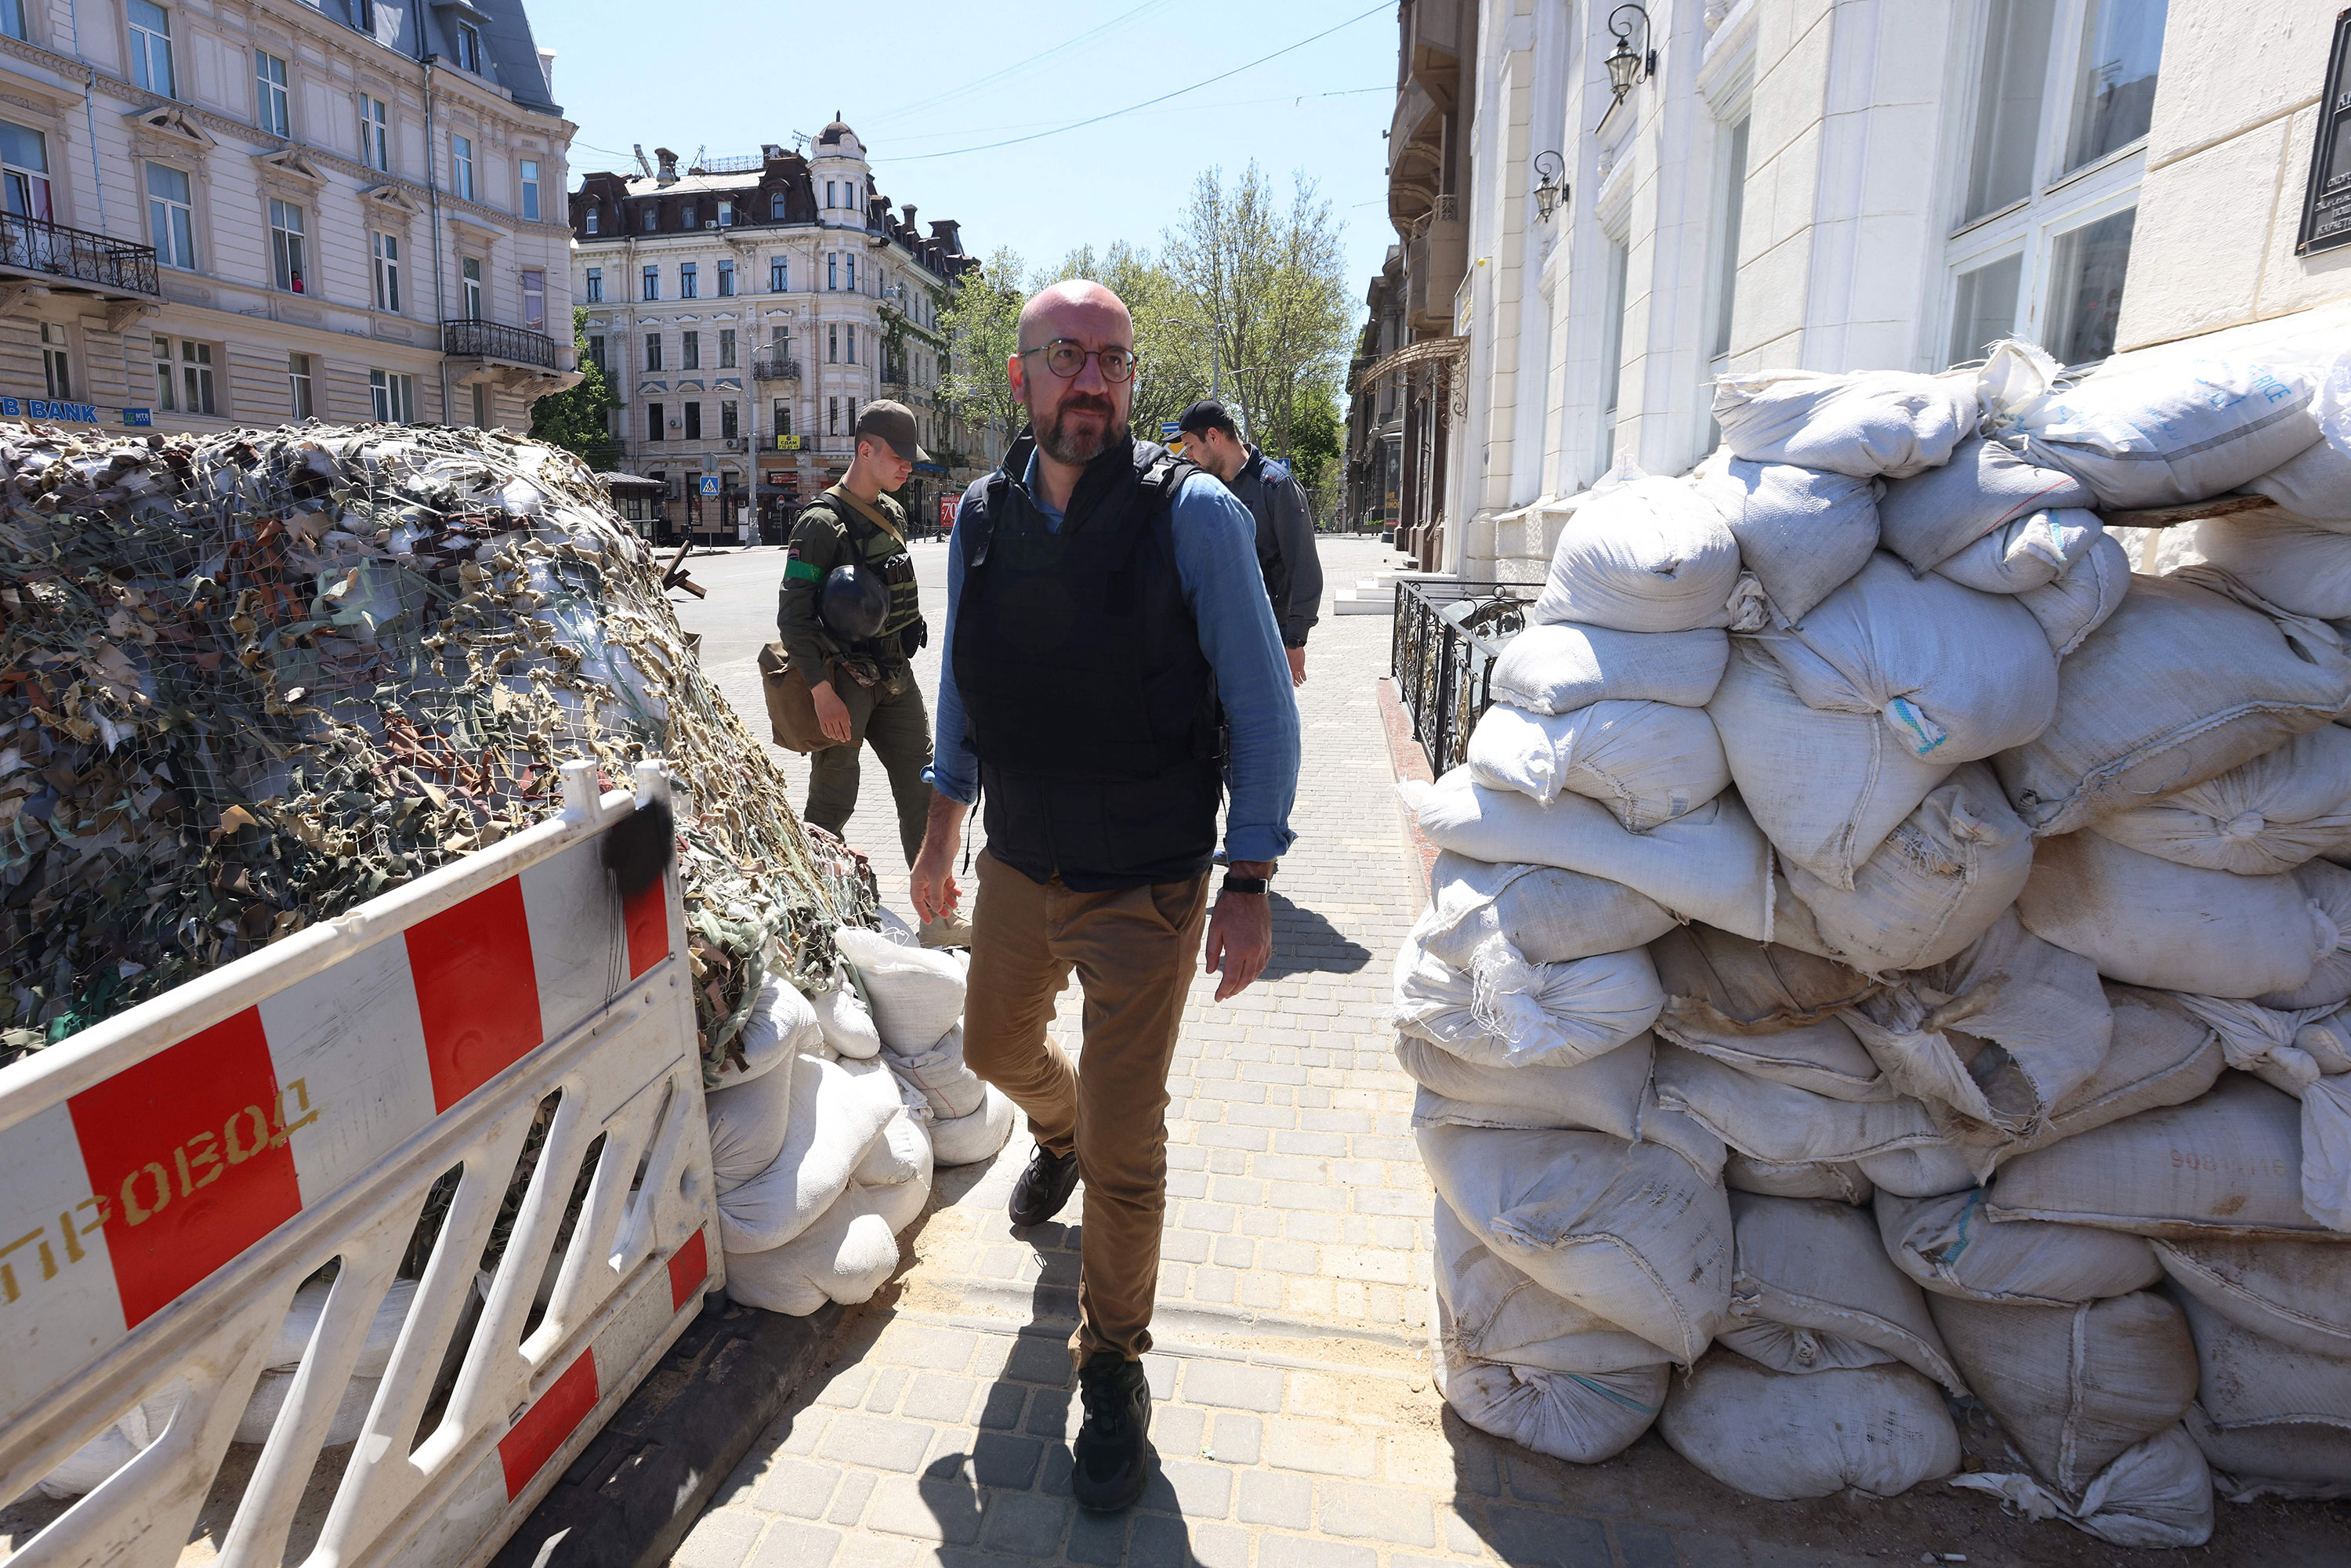 President of the European Council Charles Michel was seen during his visit to Odessa, Ukraine, on May 9, in this picture released by the European Council press office.